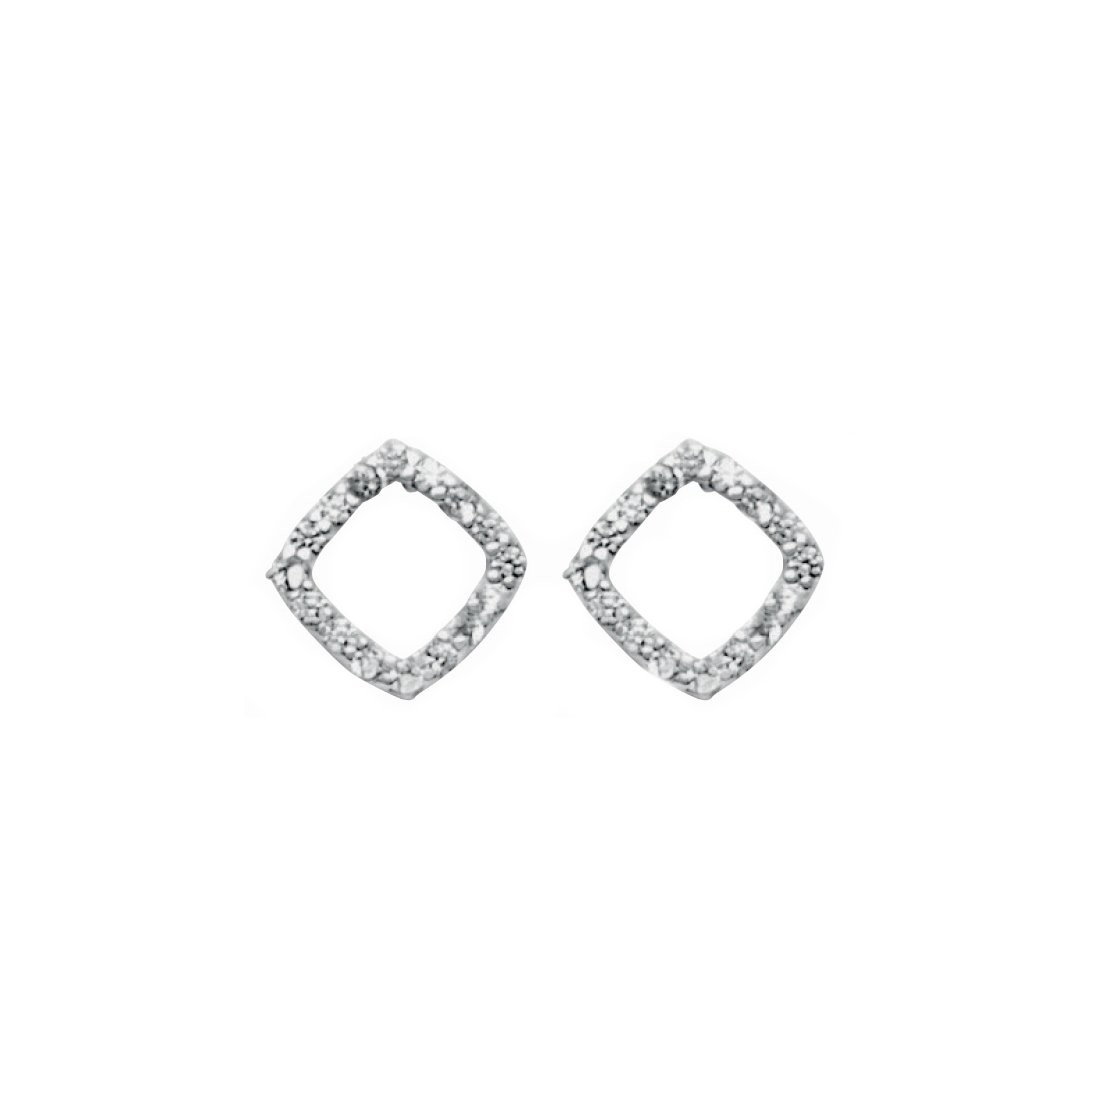 Sterling Silver and Cubic Zirconia Open Square Stud Earrings Earrings Bevilles 